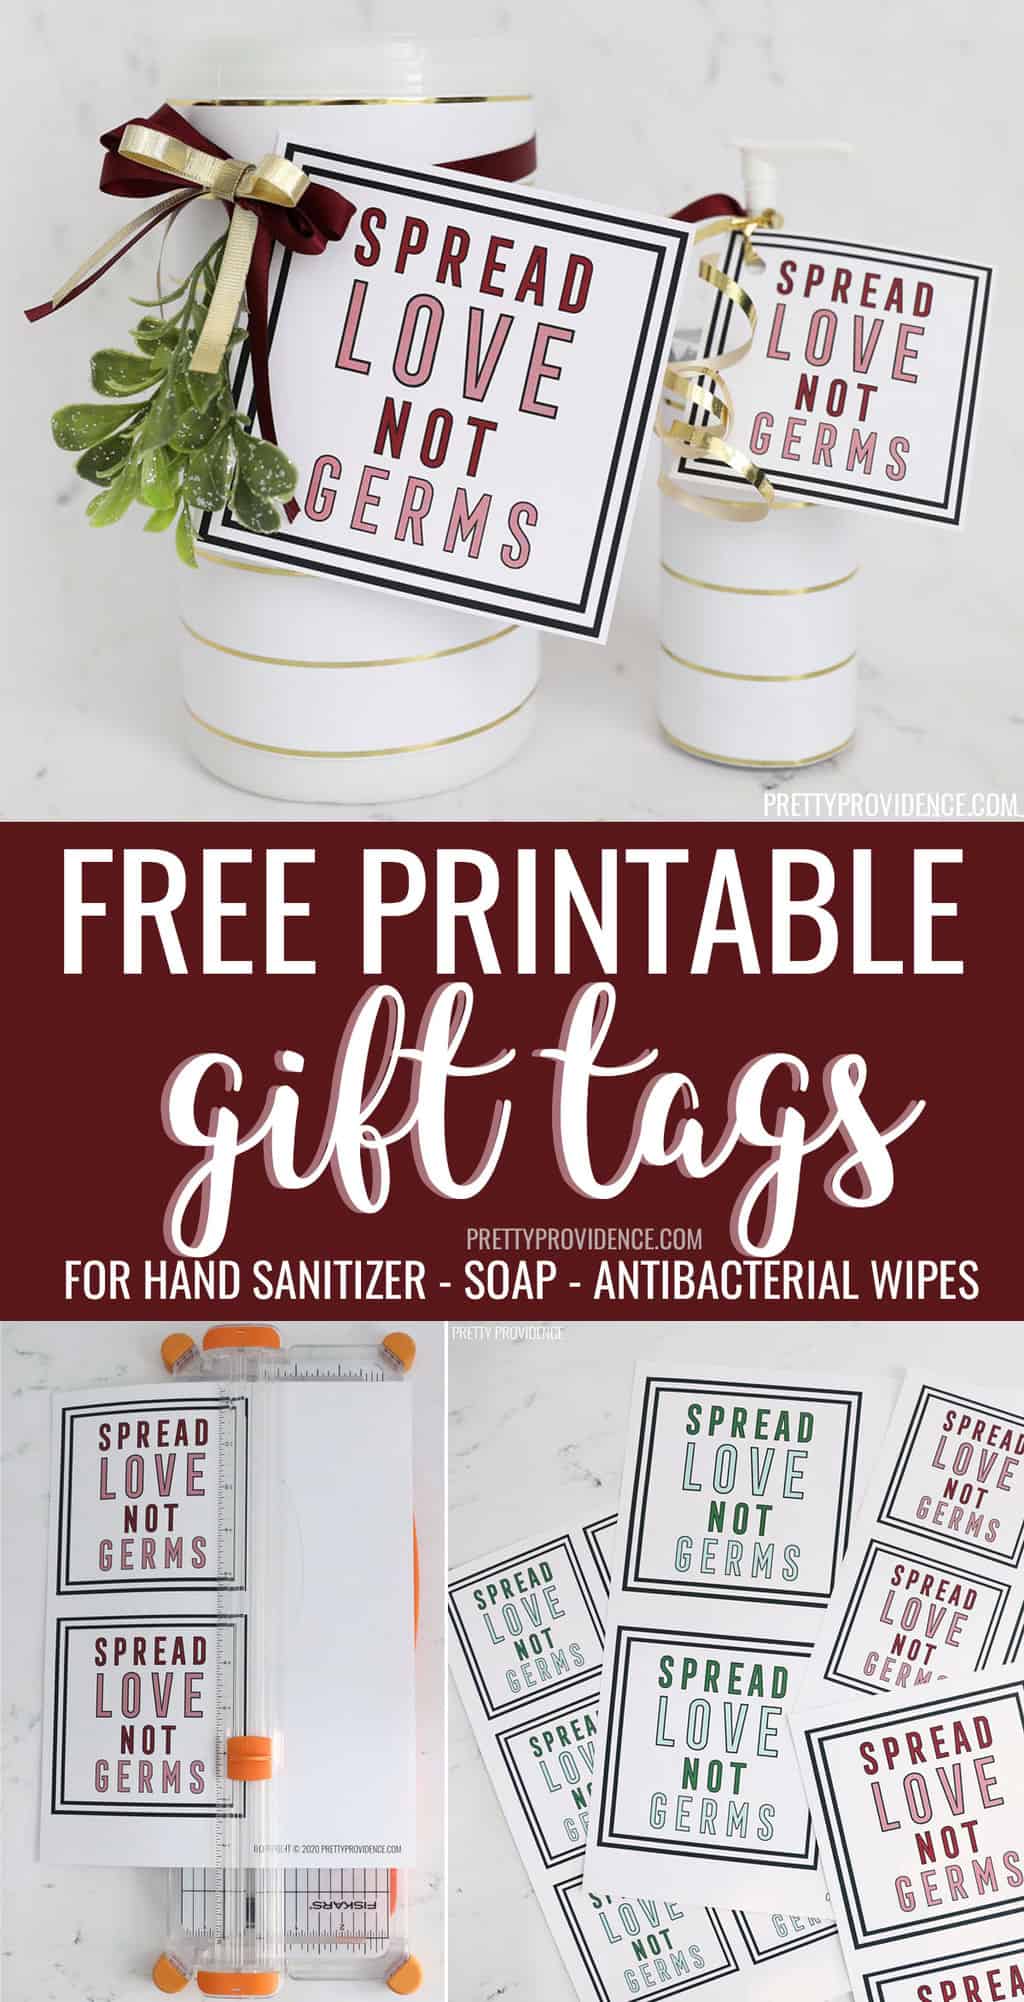 spread-love-not-germs-free-printable-gift-tags-pretty-providence